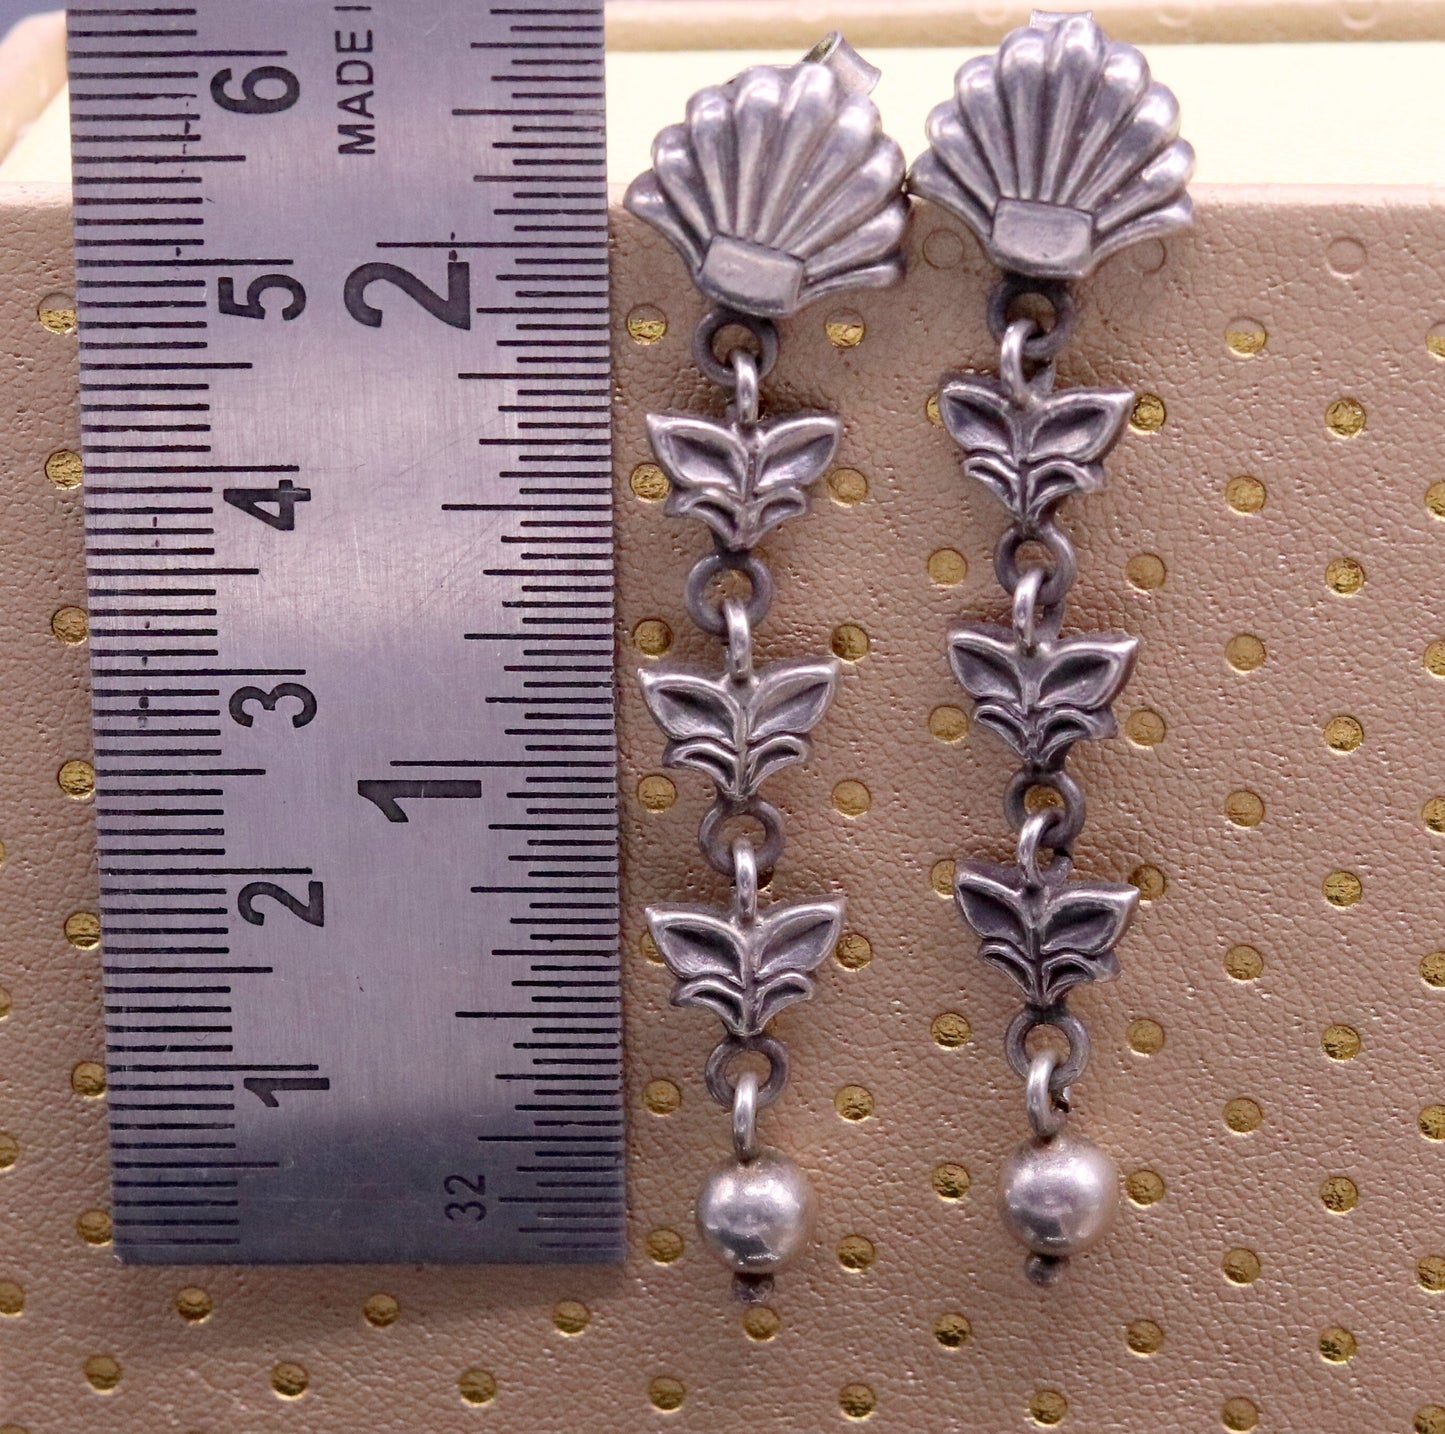 925 sterling silver handmade fabulous light weight stud earring pretty attractive gifting jewelry, oxidized tribal earring drop dangle  s821 - TRIBAL ORNAMENTS